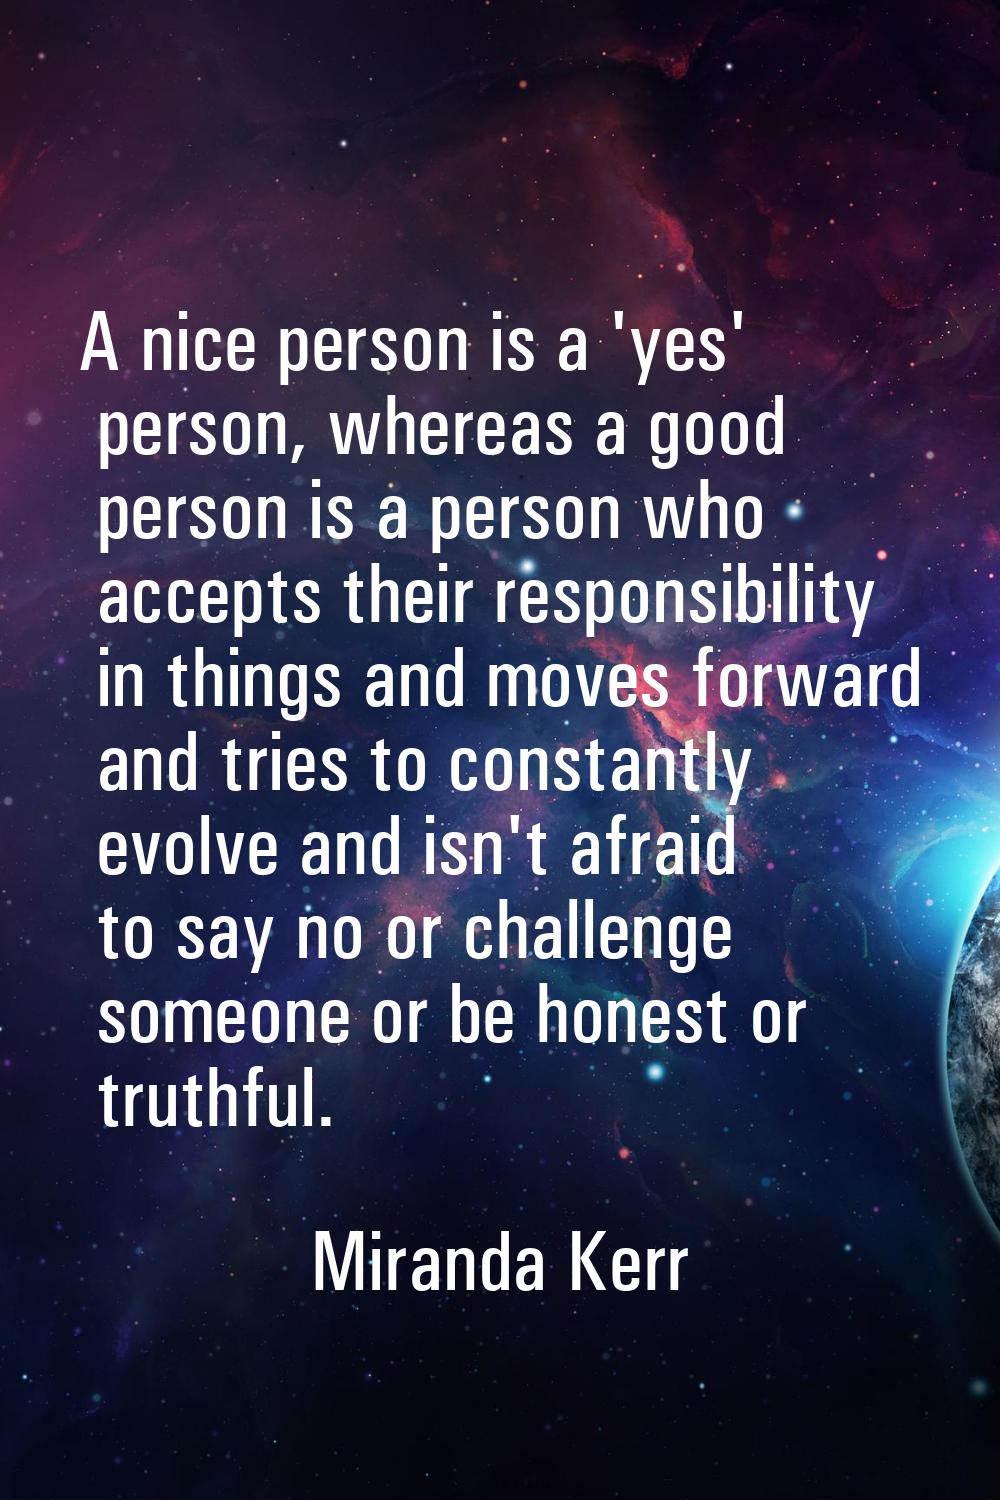 A nice person is a 'yes' person, whereas a good person is a person who accepts their responsibility